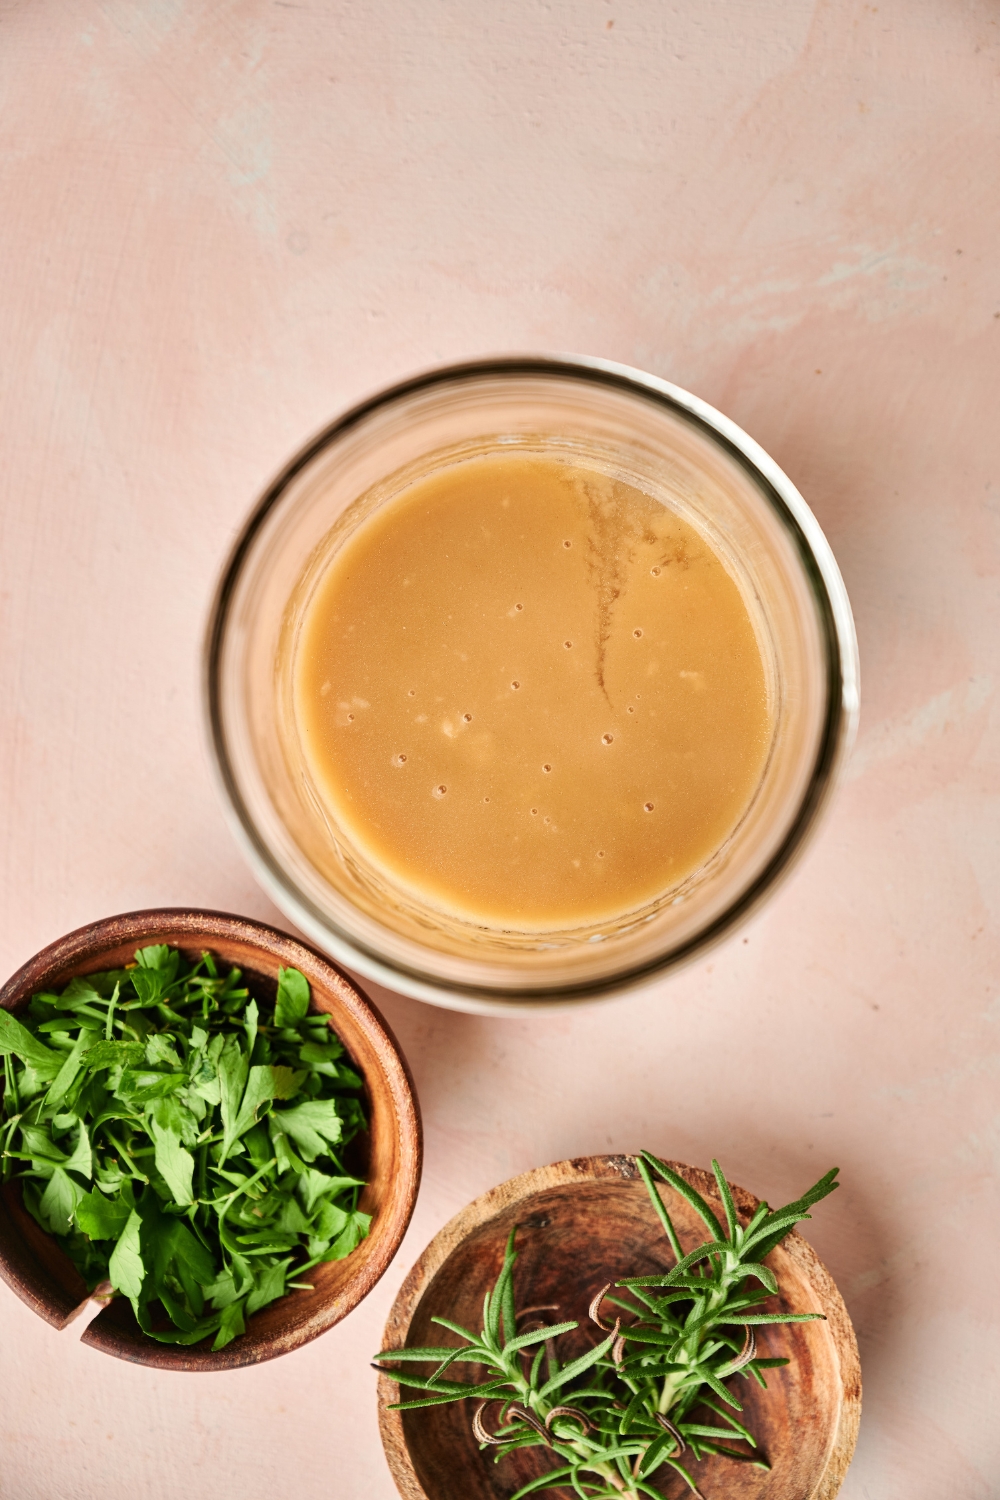 A glass jar full of gravy sits on a counter next to wooden bowls of fresh herbs.